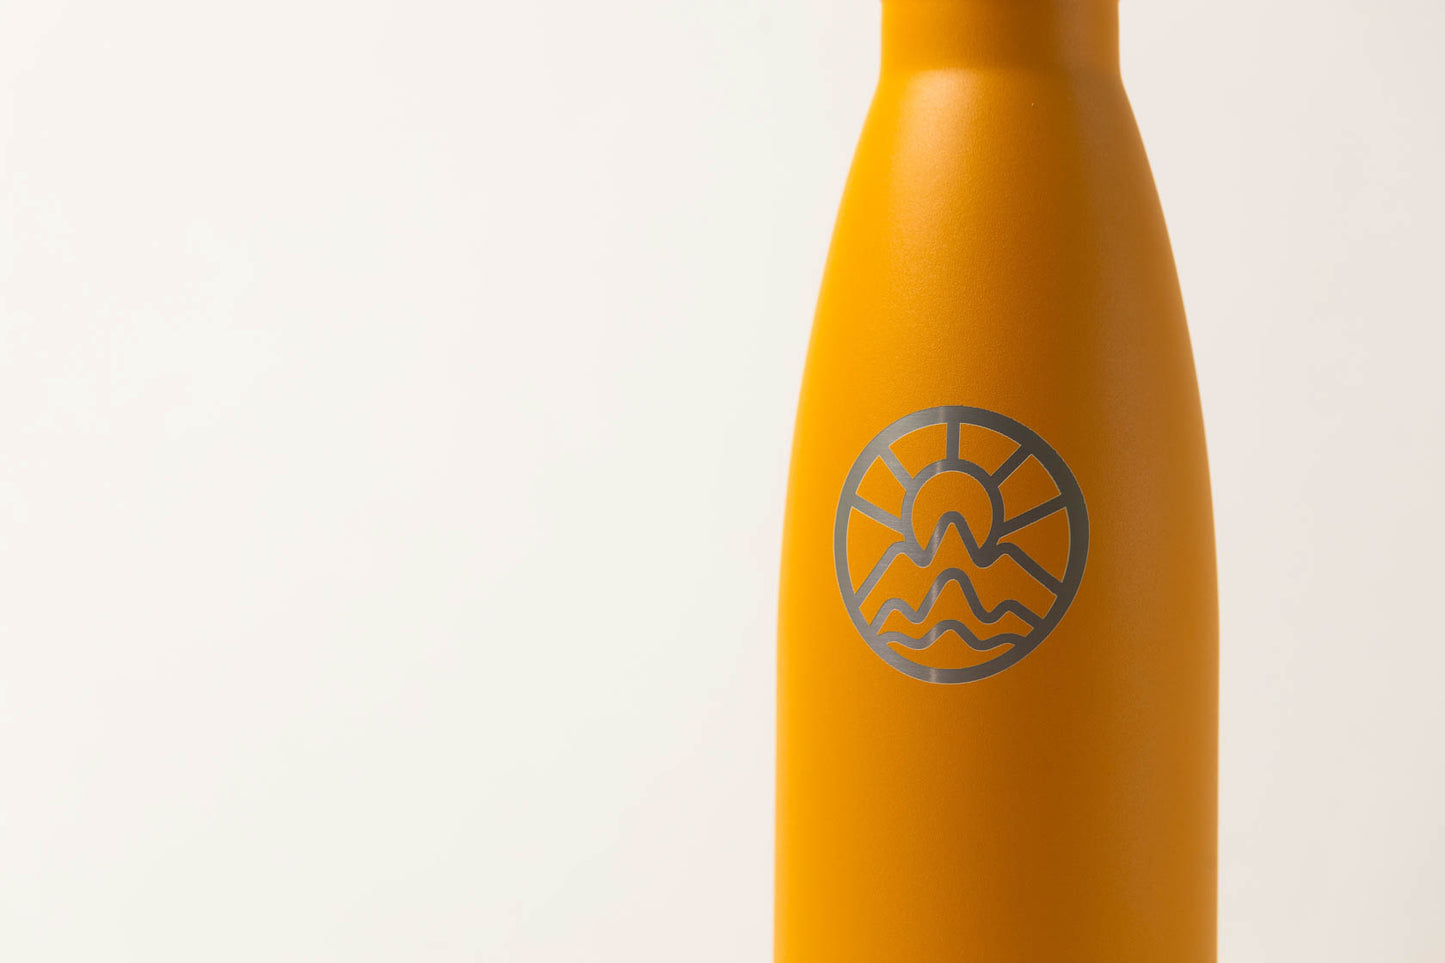 Water Bottle - 16oz McClumsy Steel Insulated - Mango